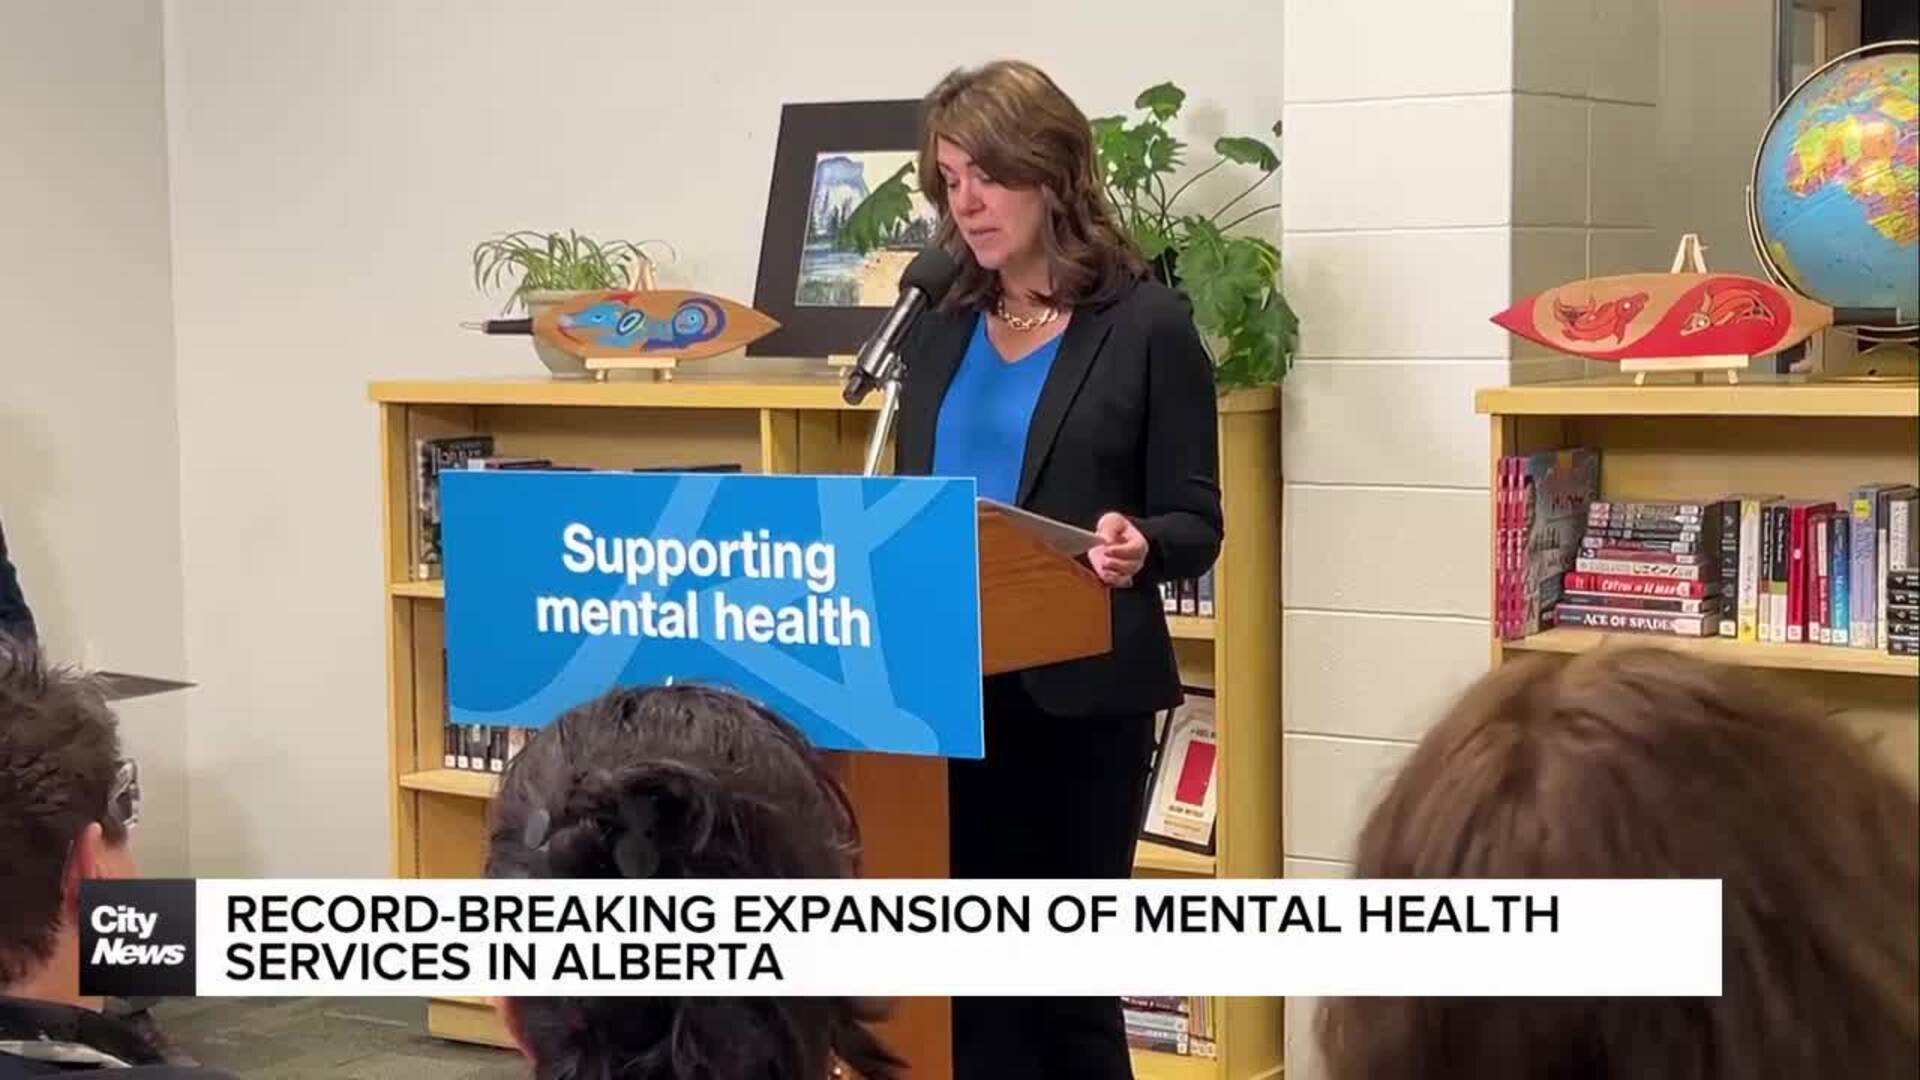 Record-breaking expansion of mental health services in Alberta